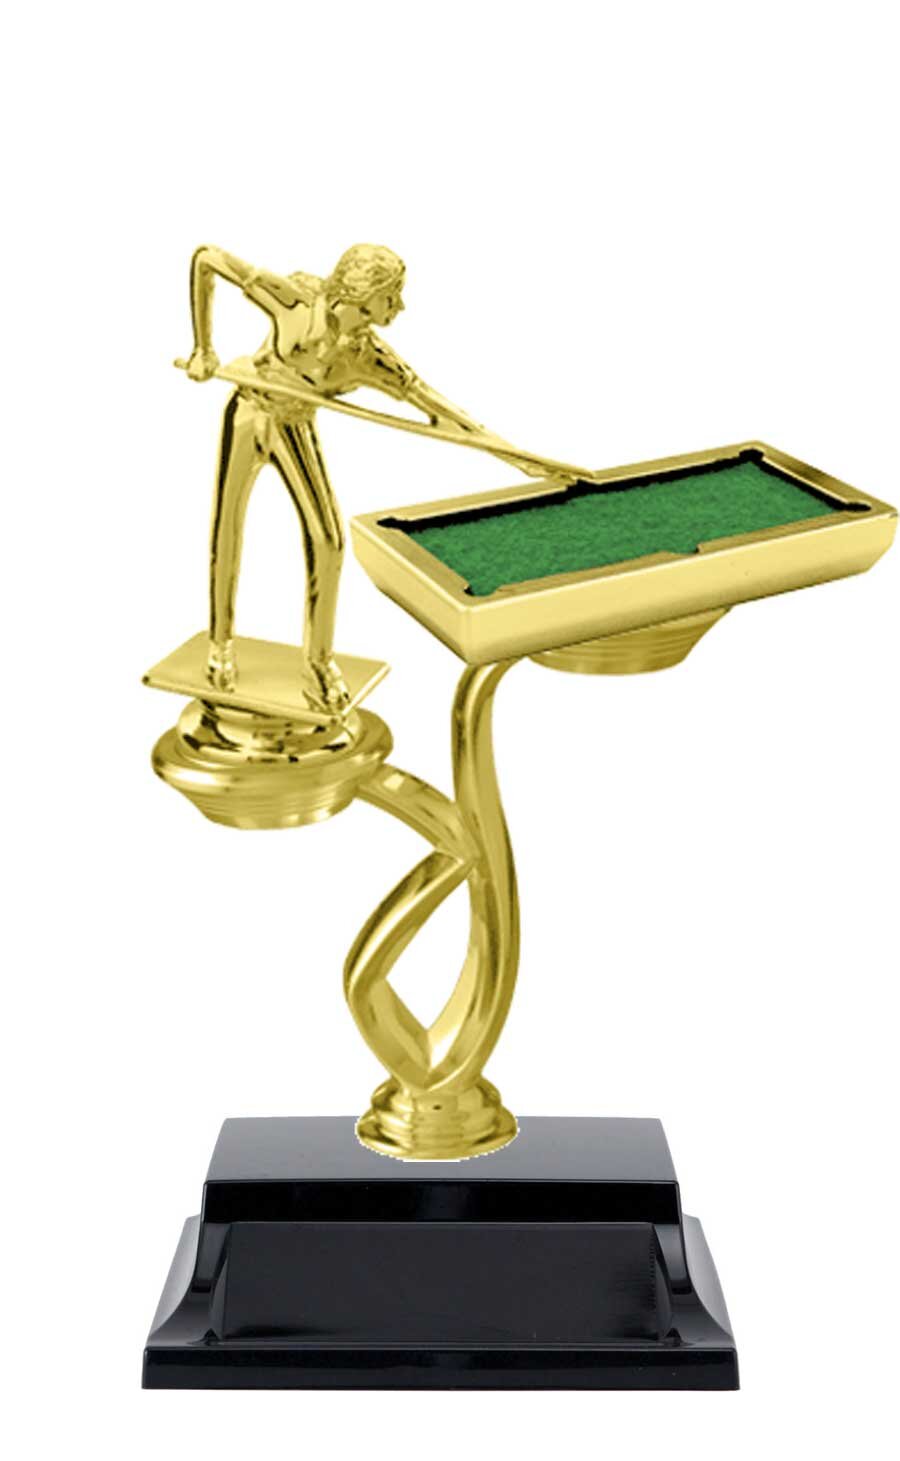 BILLIARDS FEMALE POOL PLAYER TROPHY 5.0"  FREE ENGRAVNG FAST SHIPPING